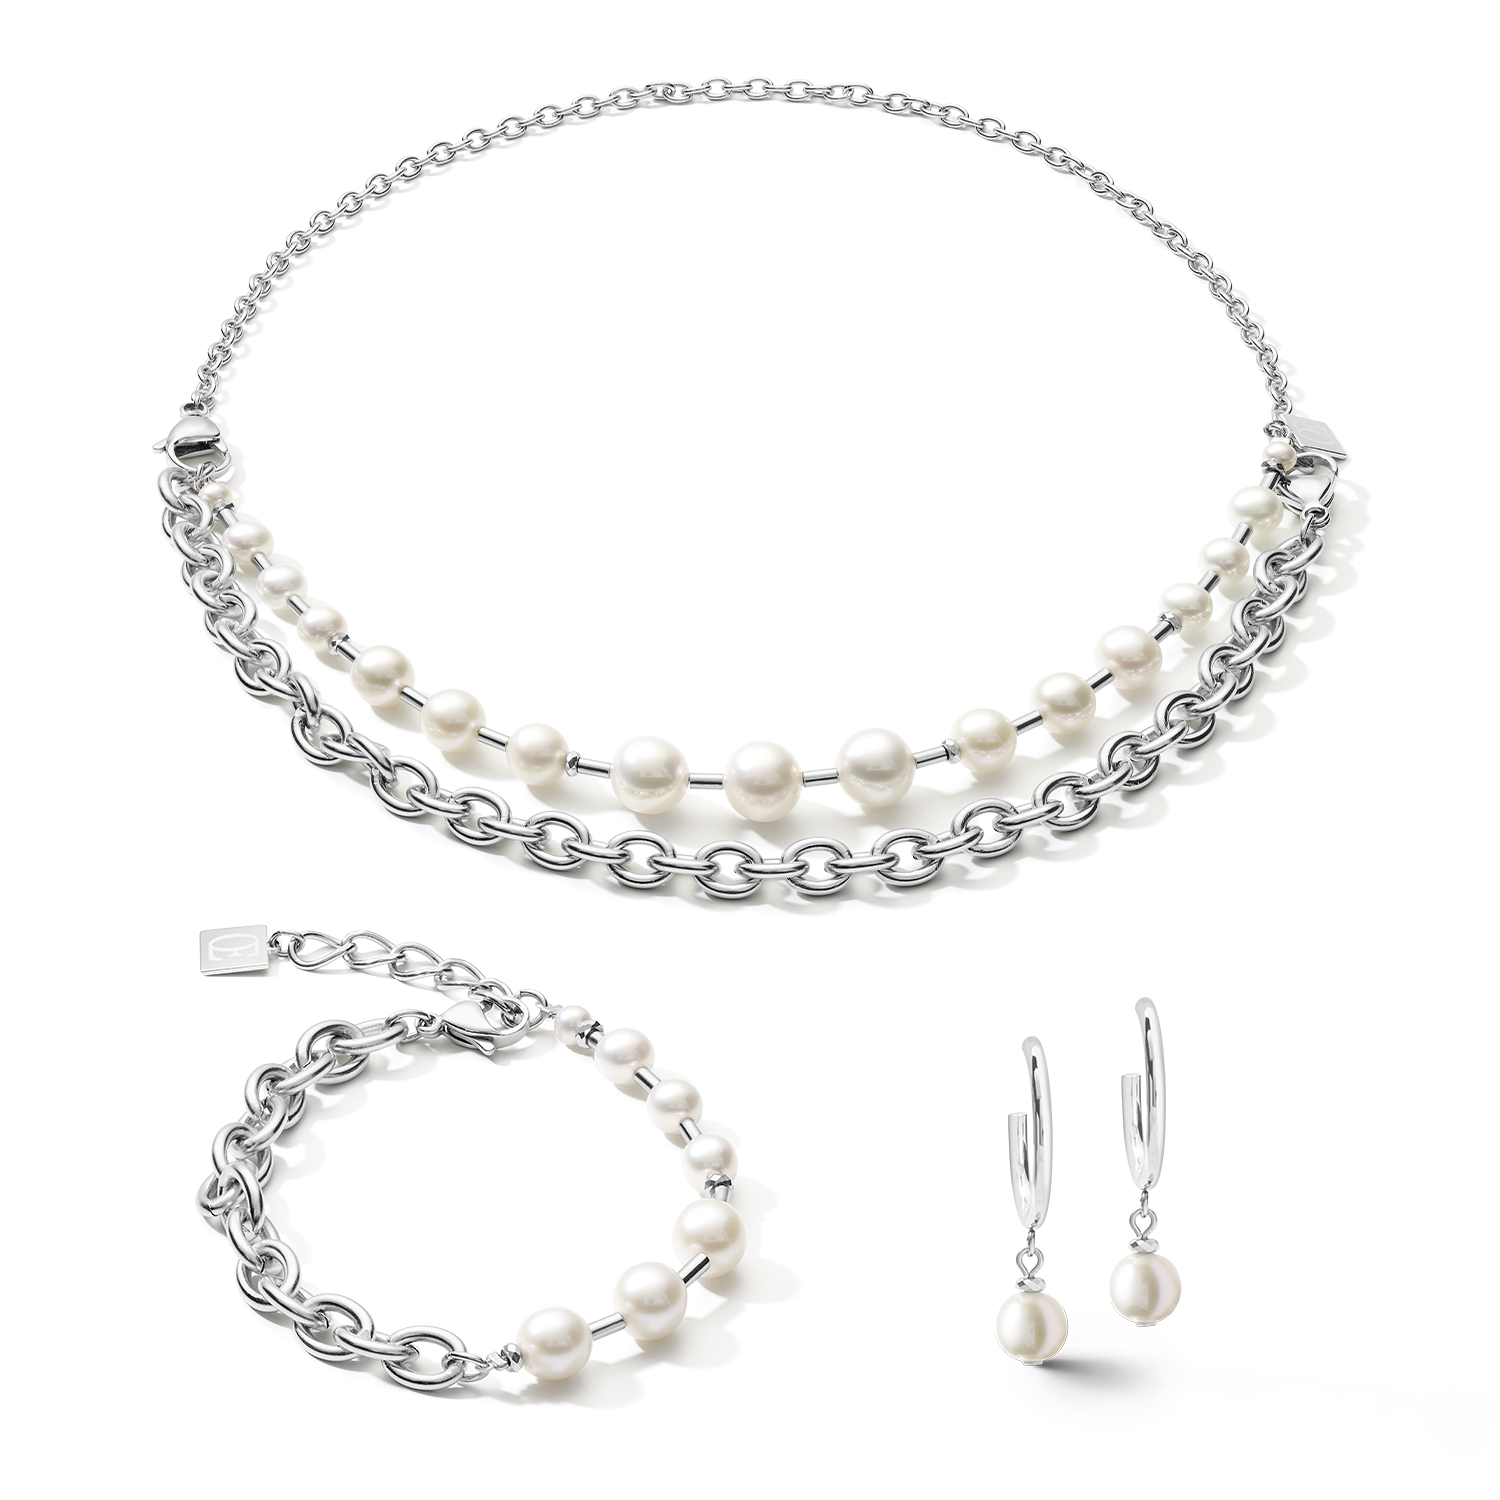 Bracelet freshwater pearls & chunky chain 4-in-1 white-silver